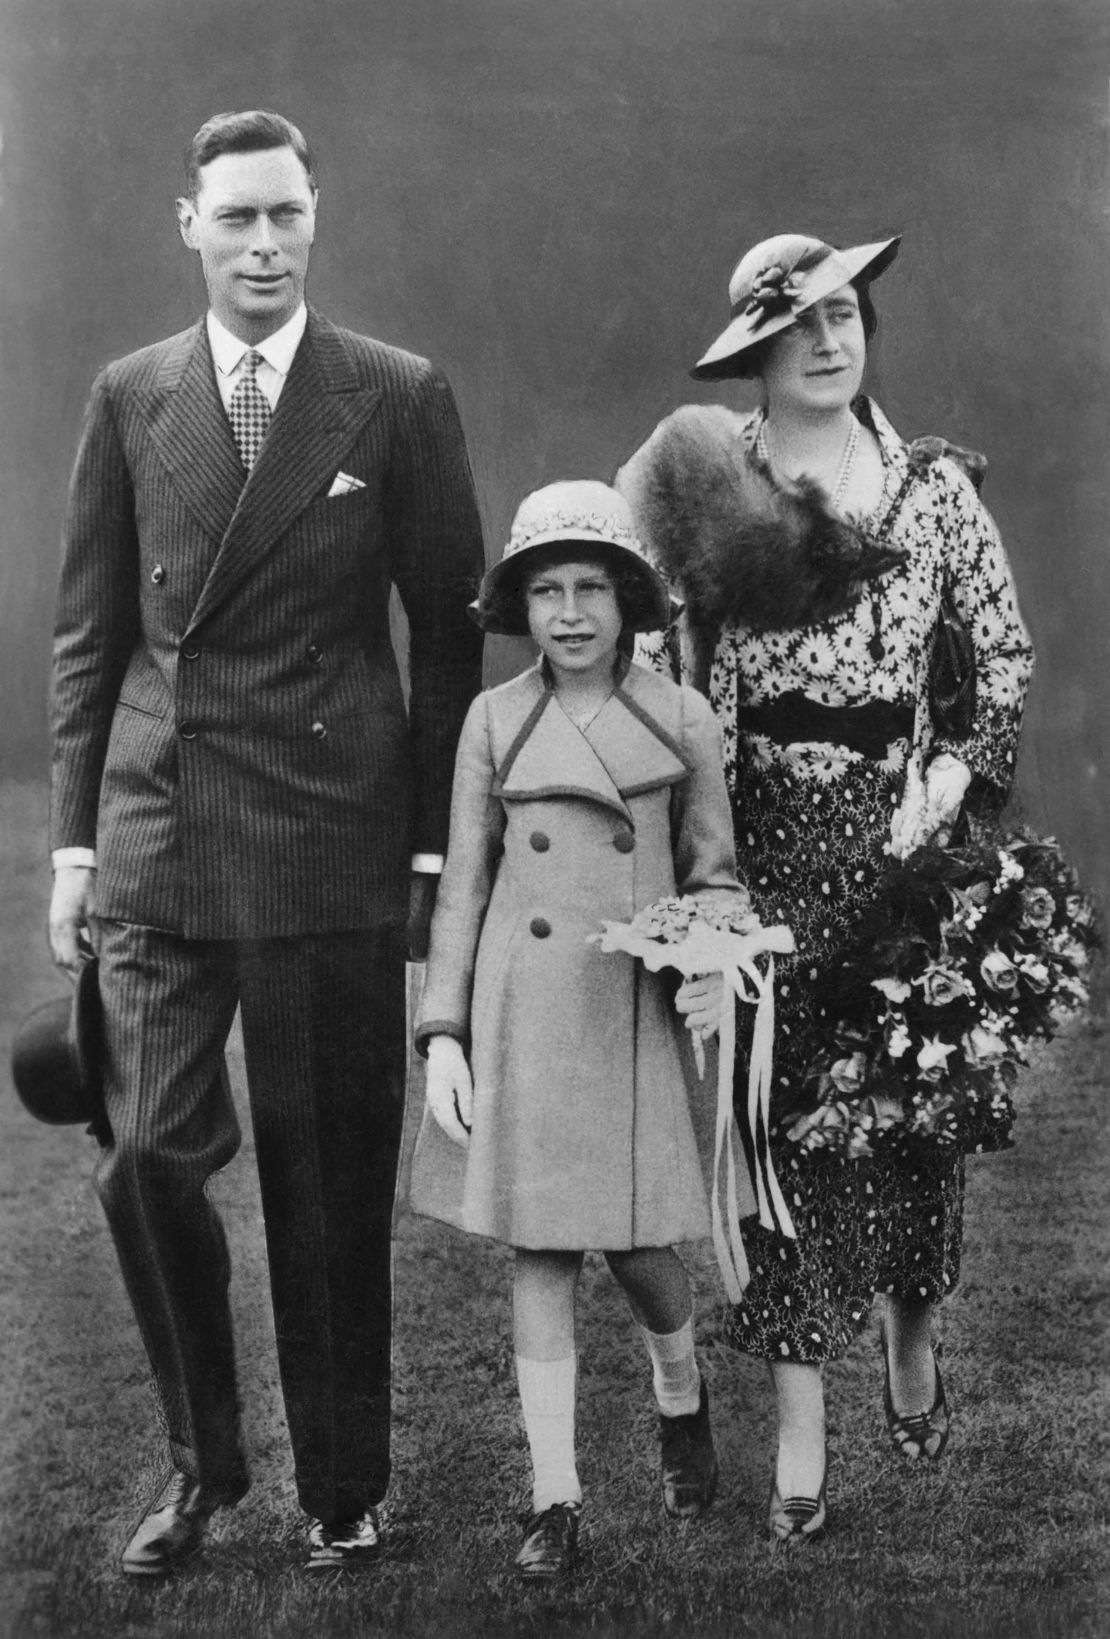 King George VI, Queen Elizabeth (better known as the Queen Mother) and then-Princess Elizabeth, circa late 1930s.